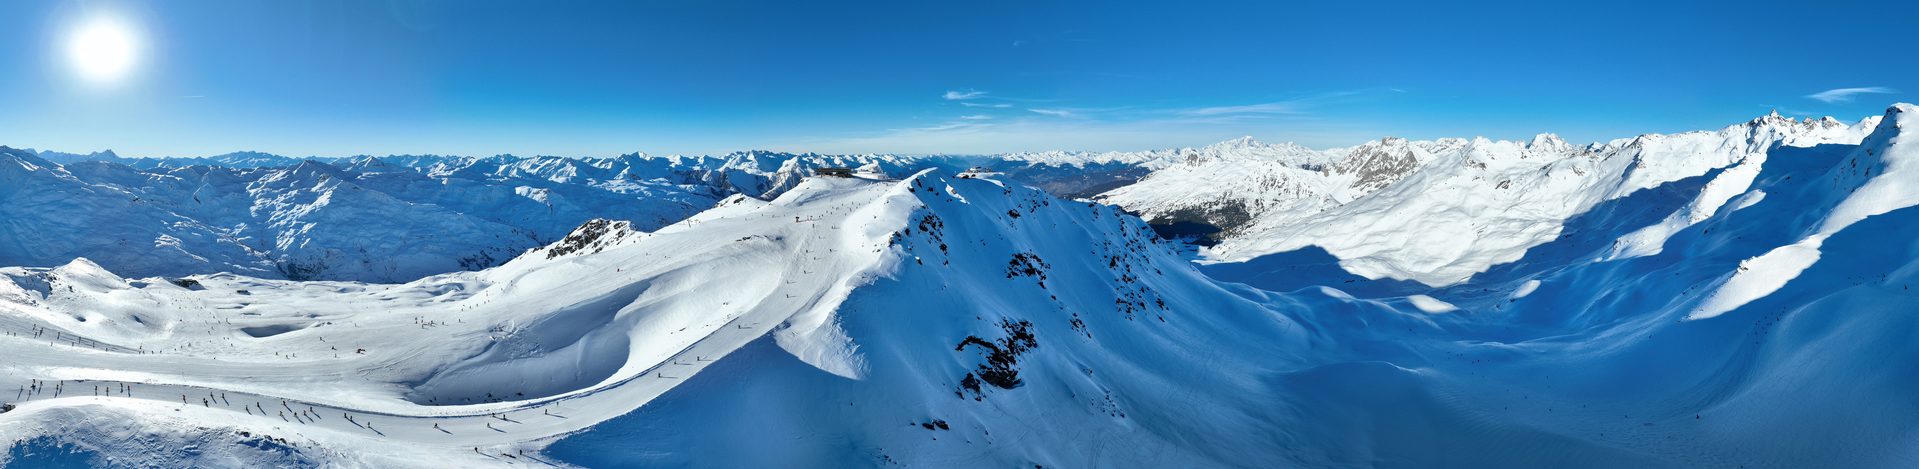 Panoramic view from Col de la Chambre, Val Thorens in Les 3 Vallées